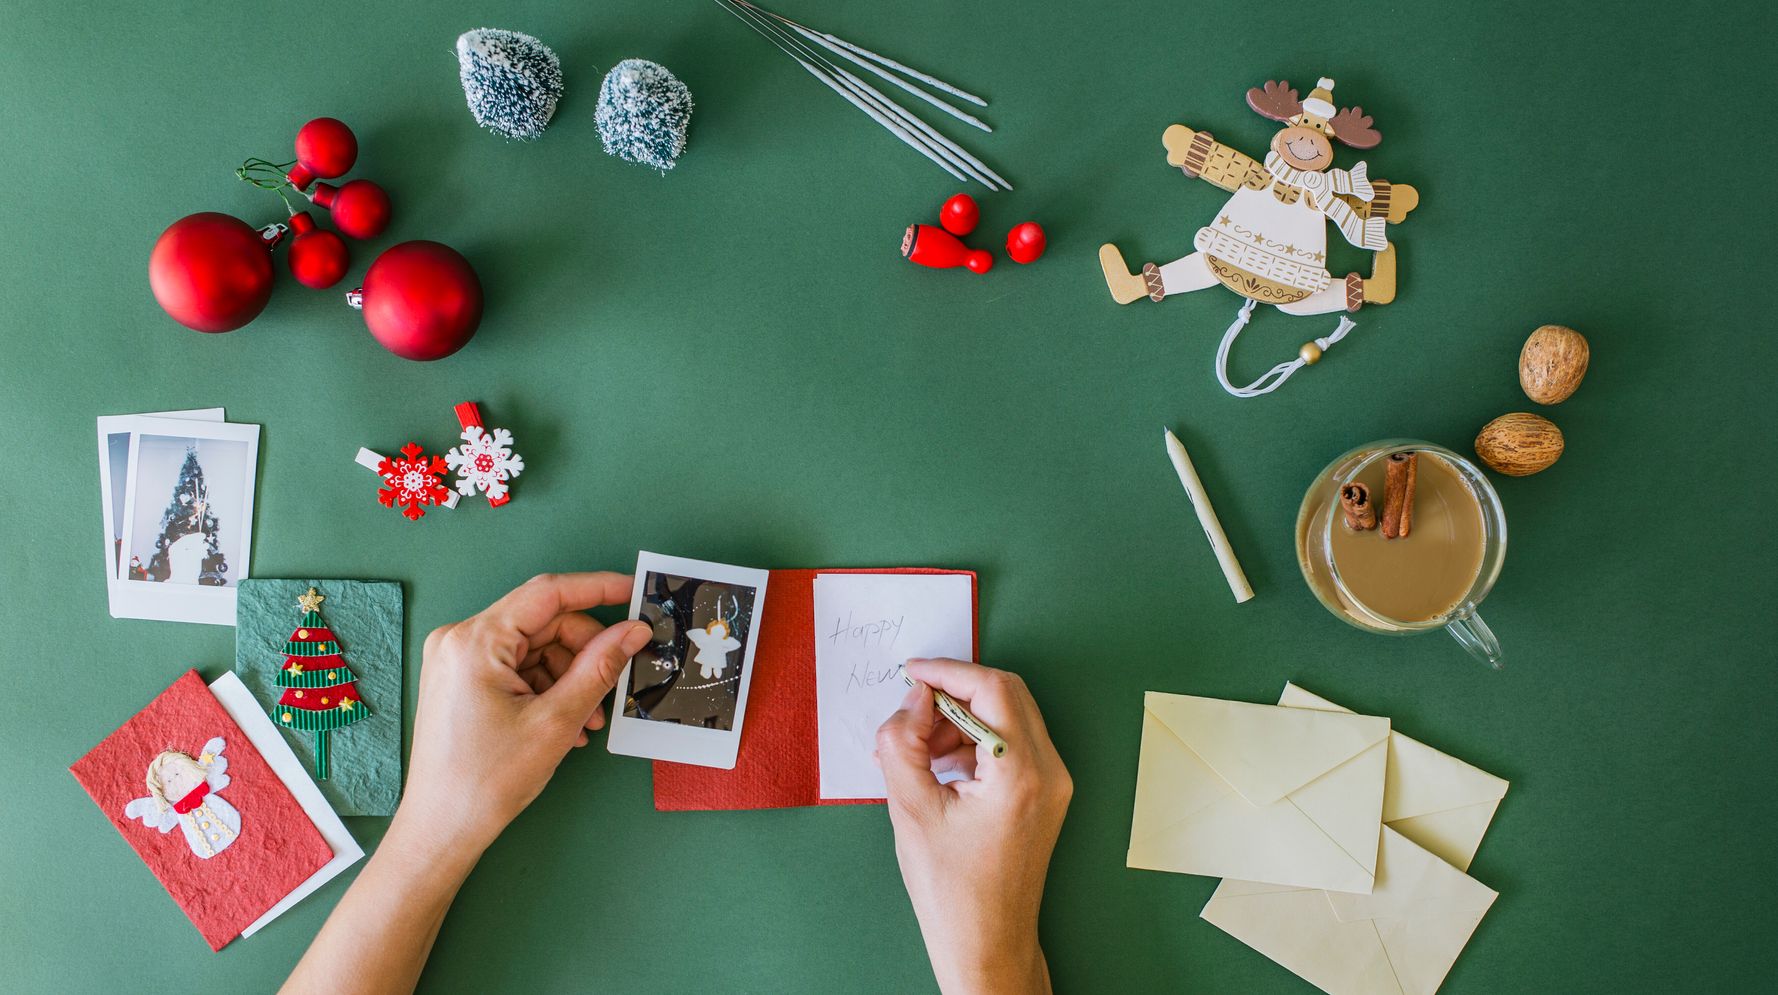 How to Write Holiday Cards During a Pandemic: 5 Ways to Share With